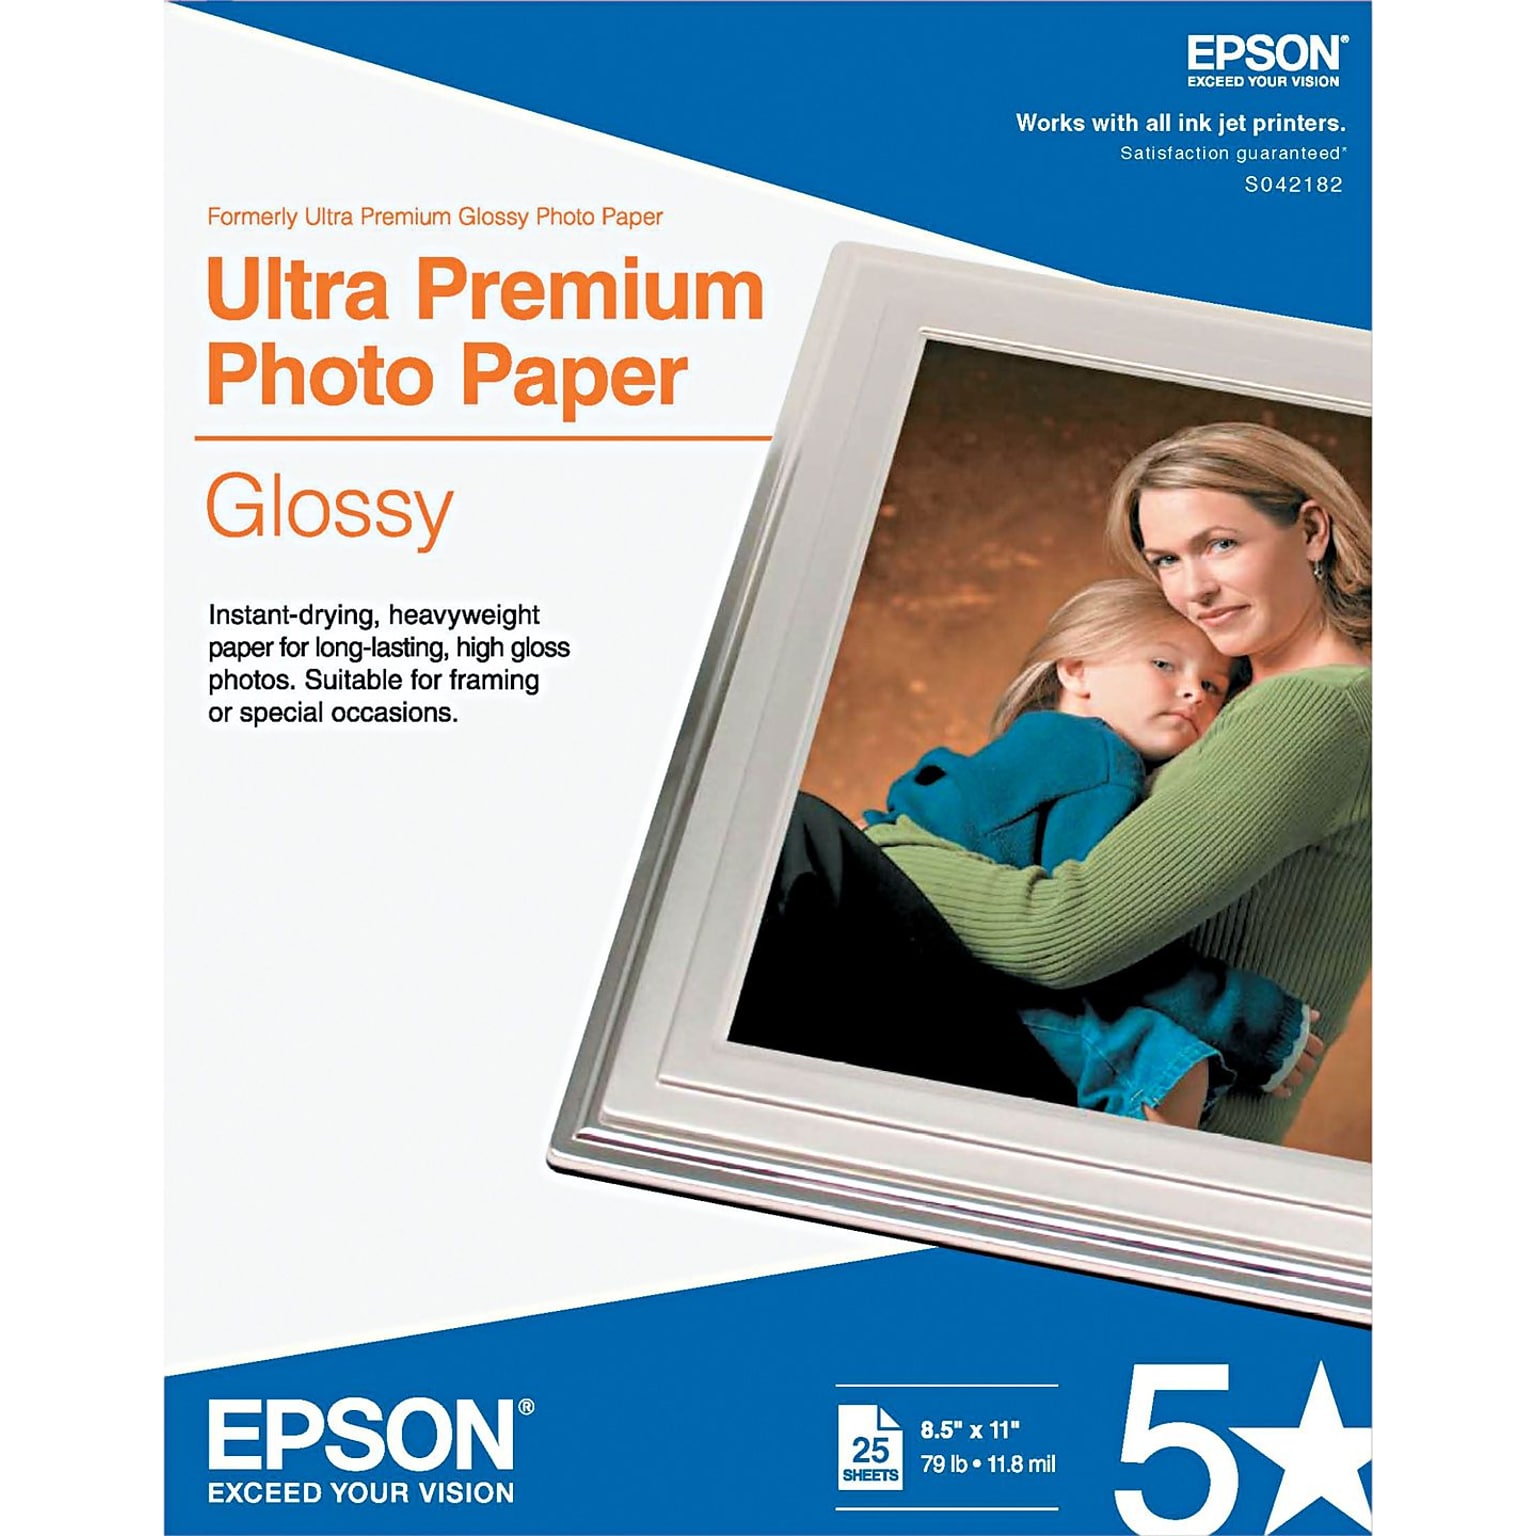 Epson Ultra Premium Glossy Photo Paper, 8.5 x 11, 25 Sheets/Pack (S042182)